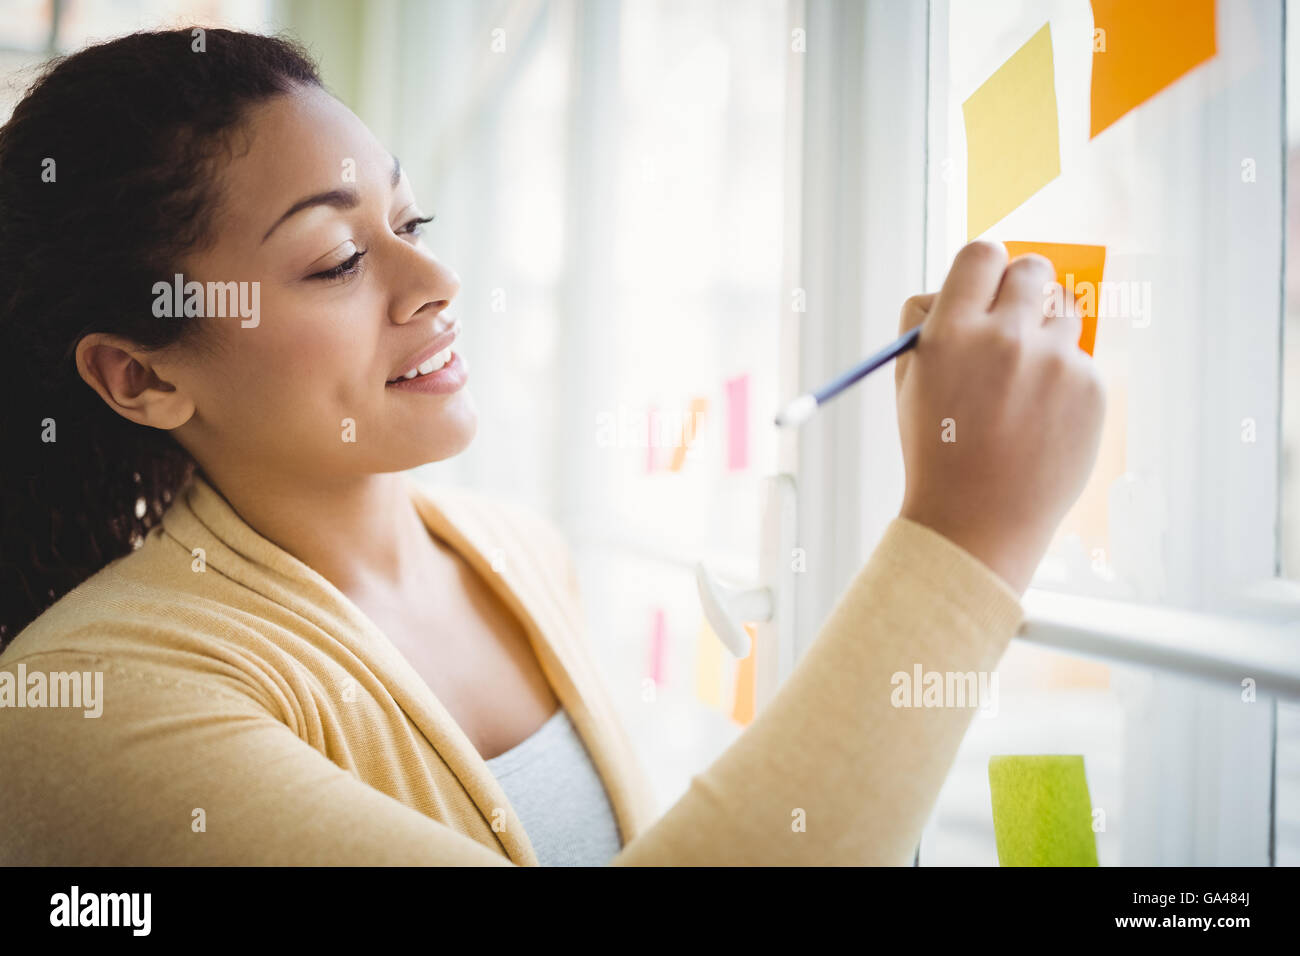 Businesswoman smiling while writing on adhesive note Stock Photo